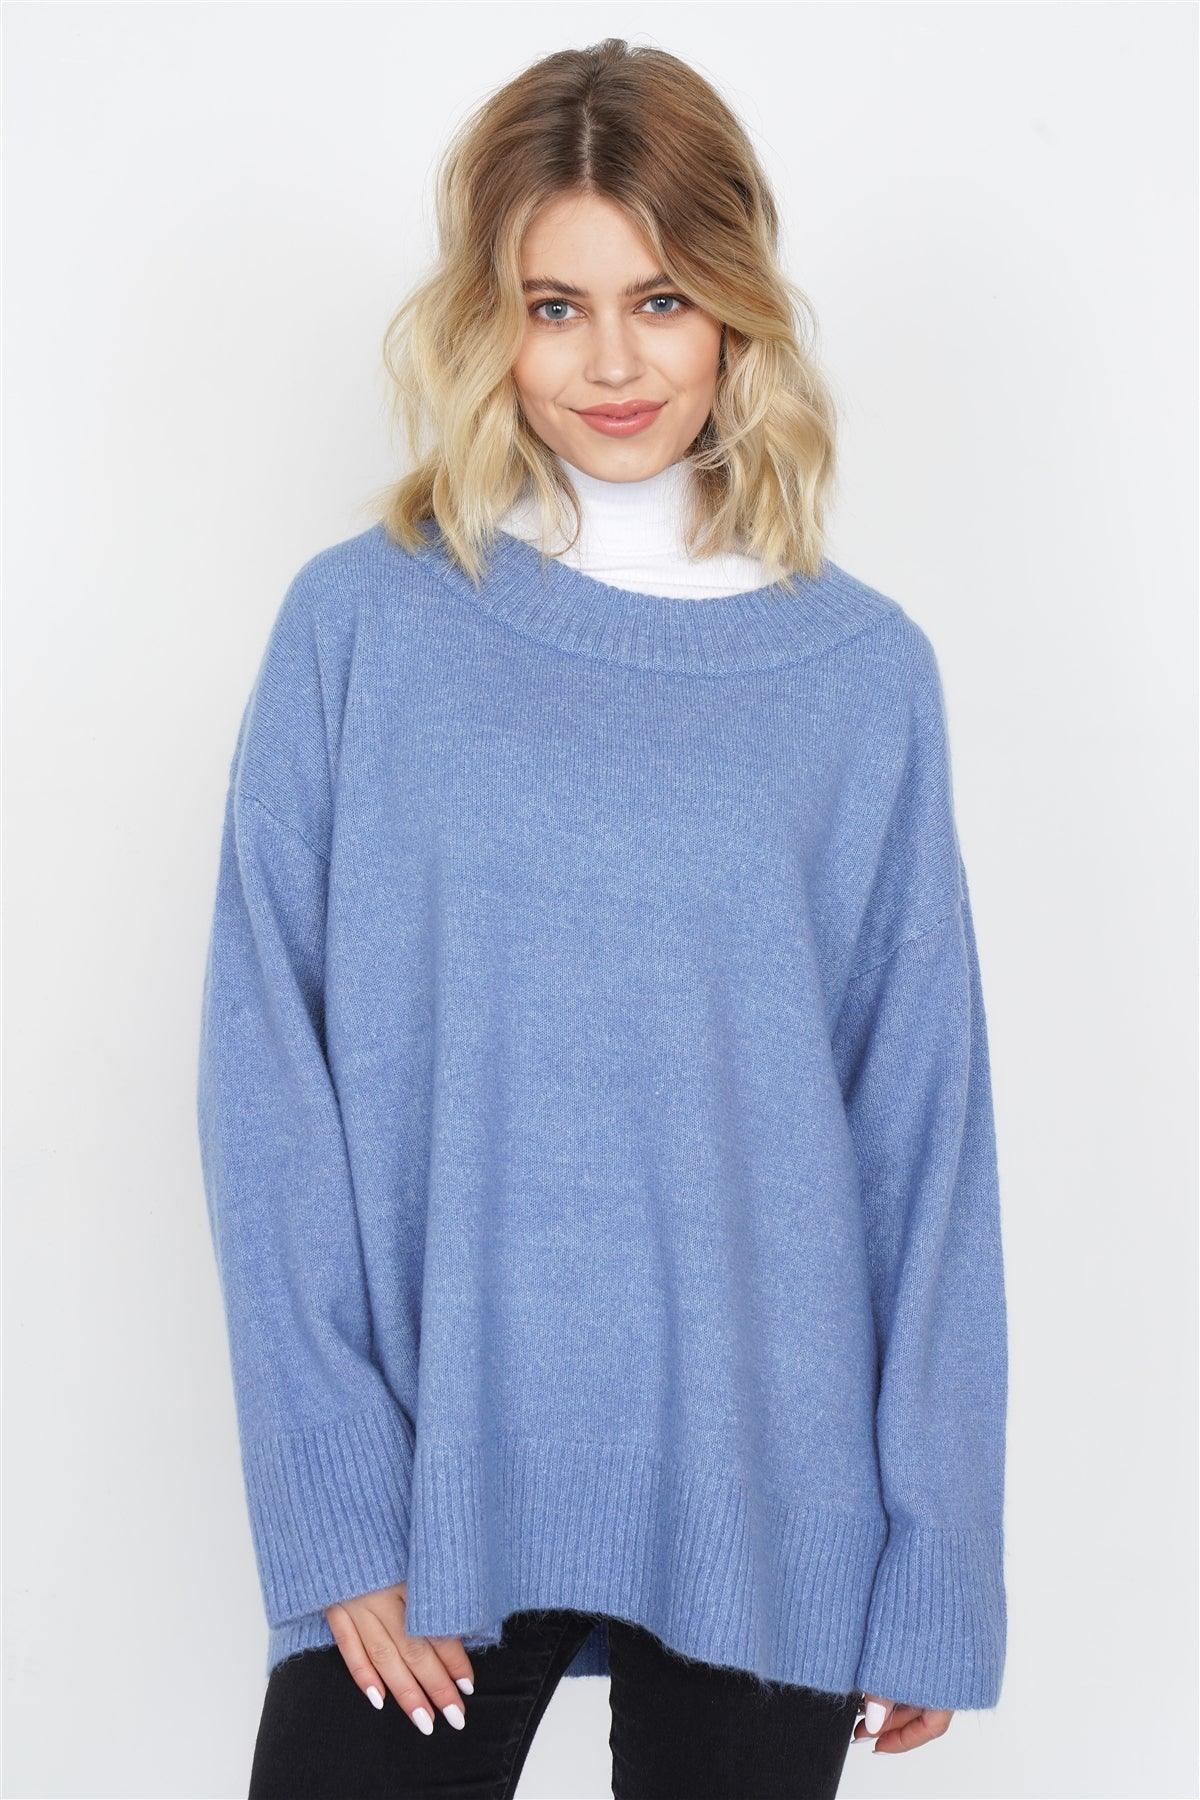 Blue Solid Wool Chic Oversized Ribbed Hem Scoop Neck Sweater /4-2